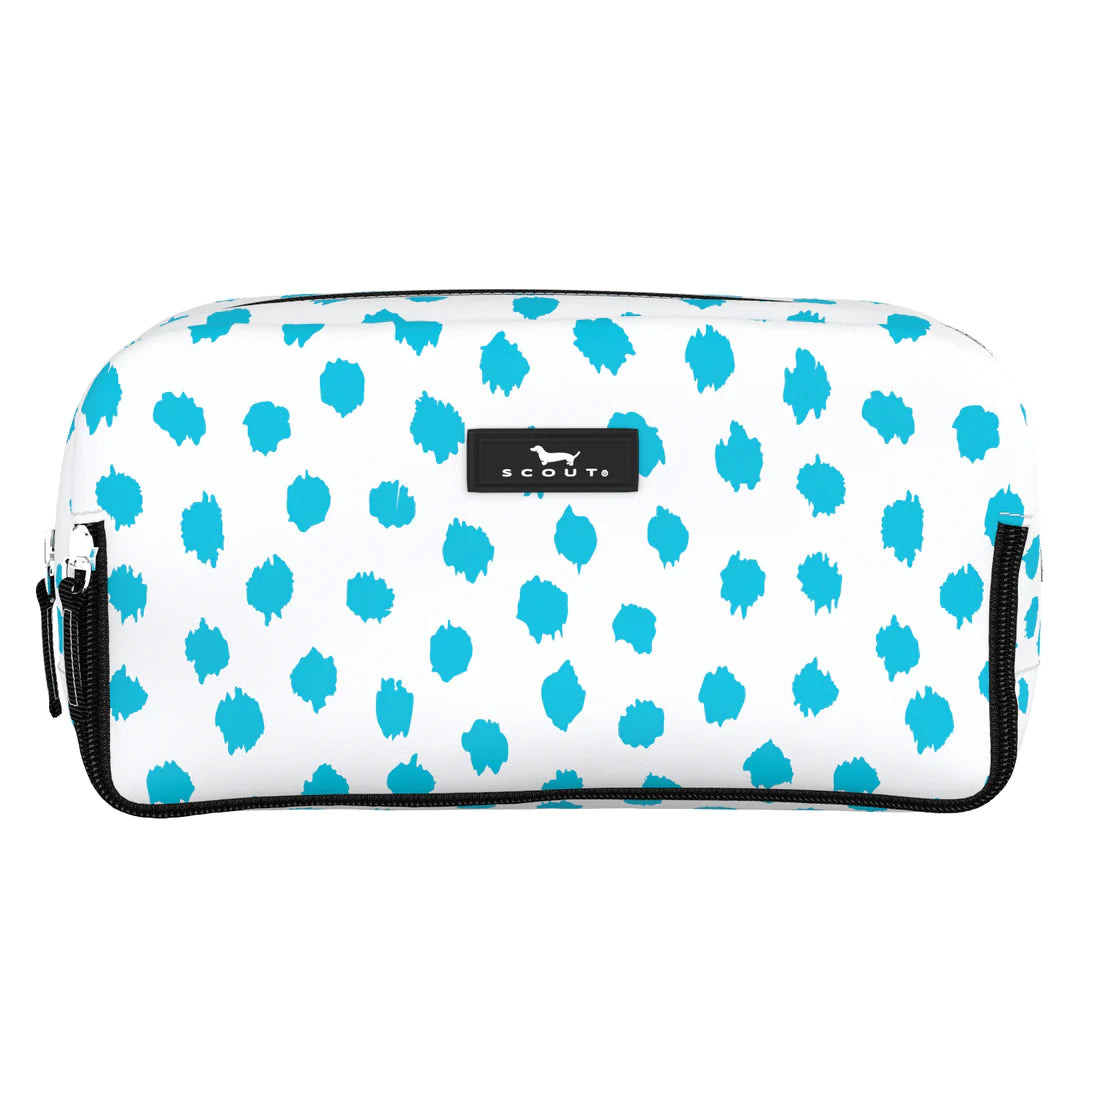 Scout 3-Way Toiletry Bag - Puddle Jumper